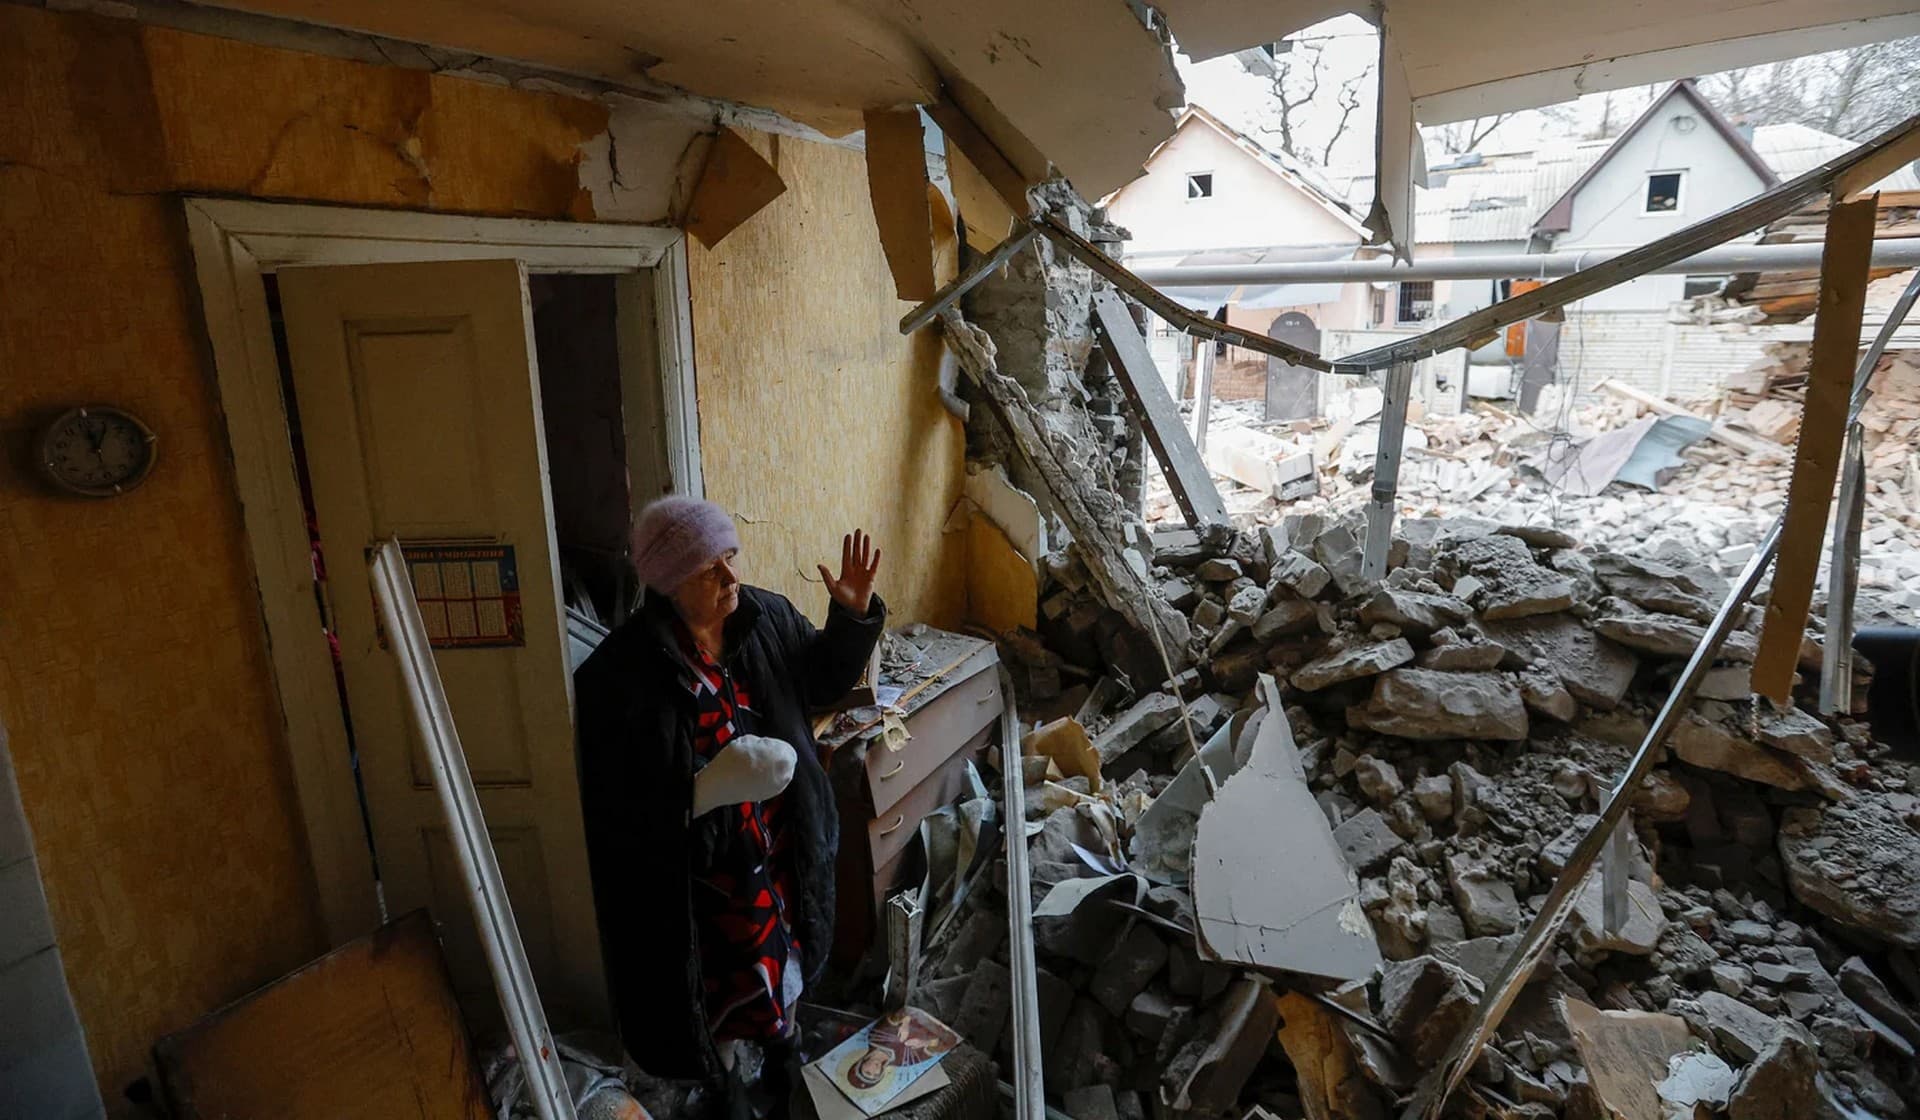 Local resident Svetlana Boiko, 66, who was injured in recent shelling, reacts outside her destroyed house in Donetsk